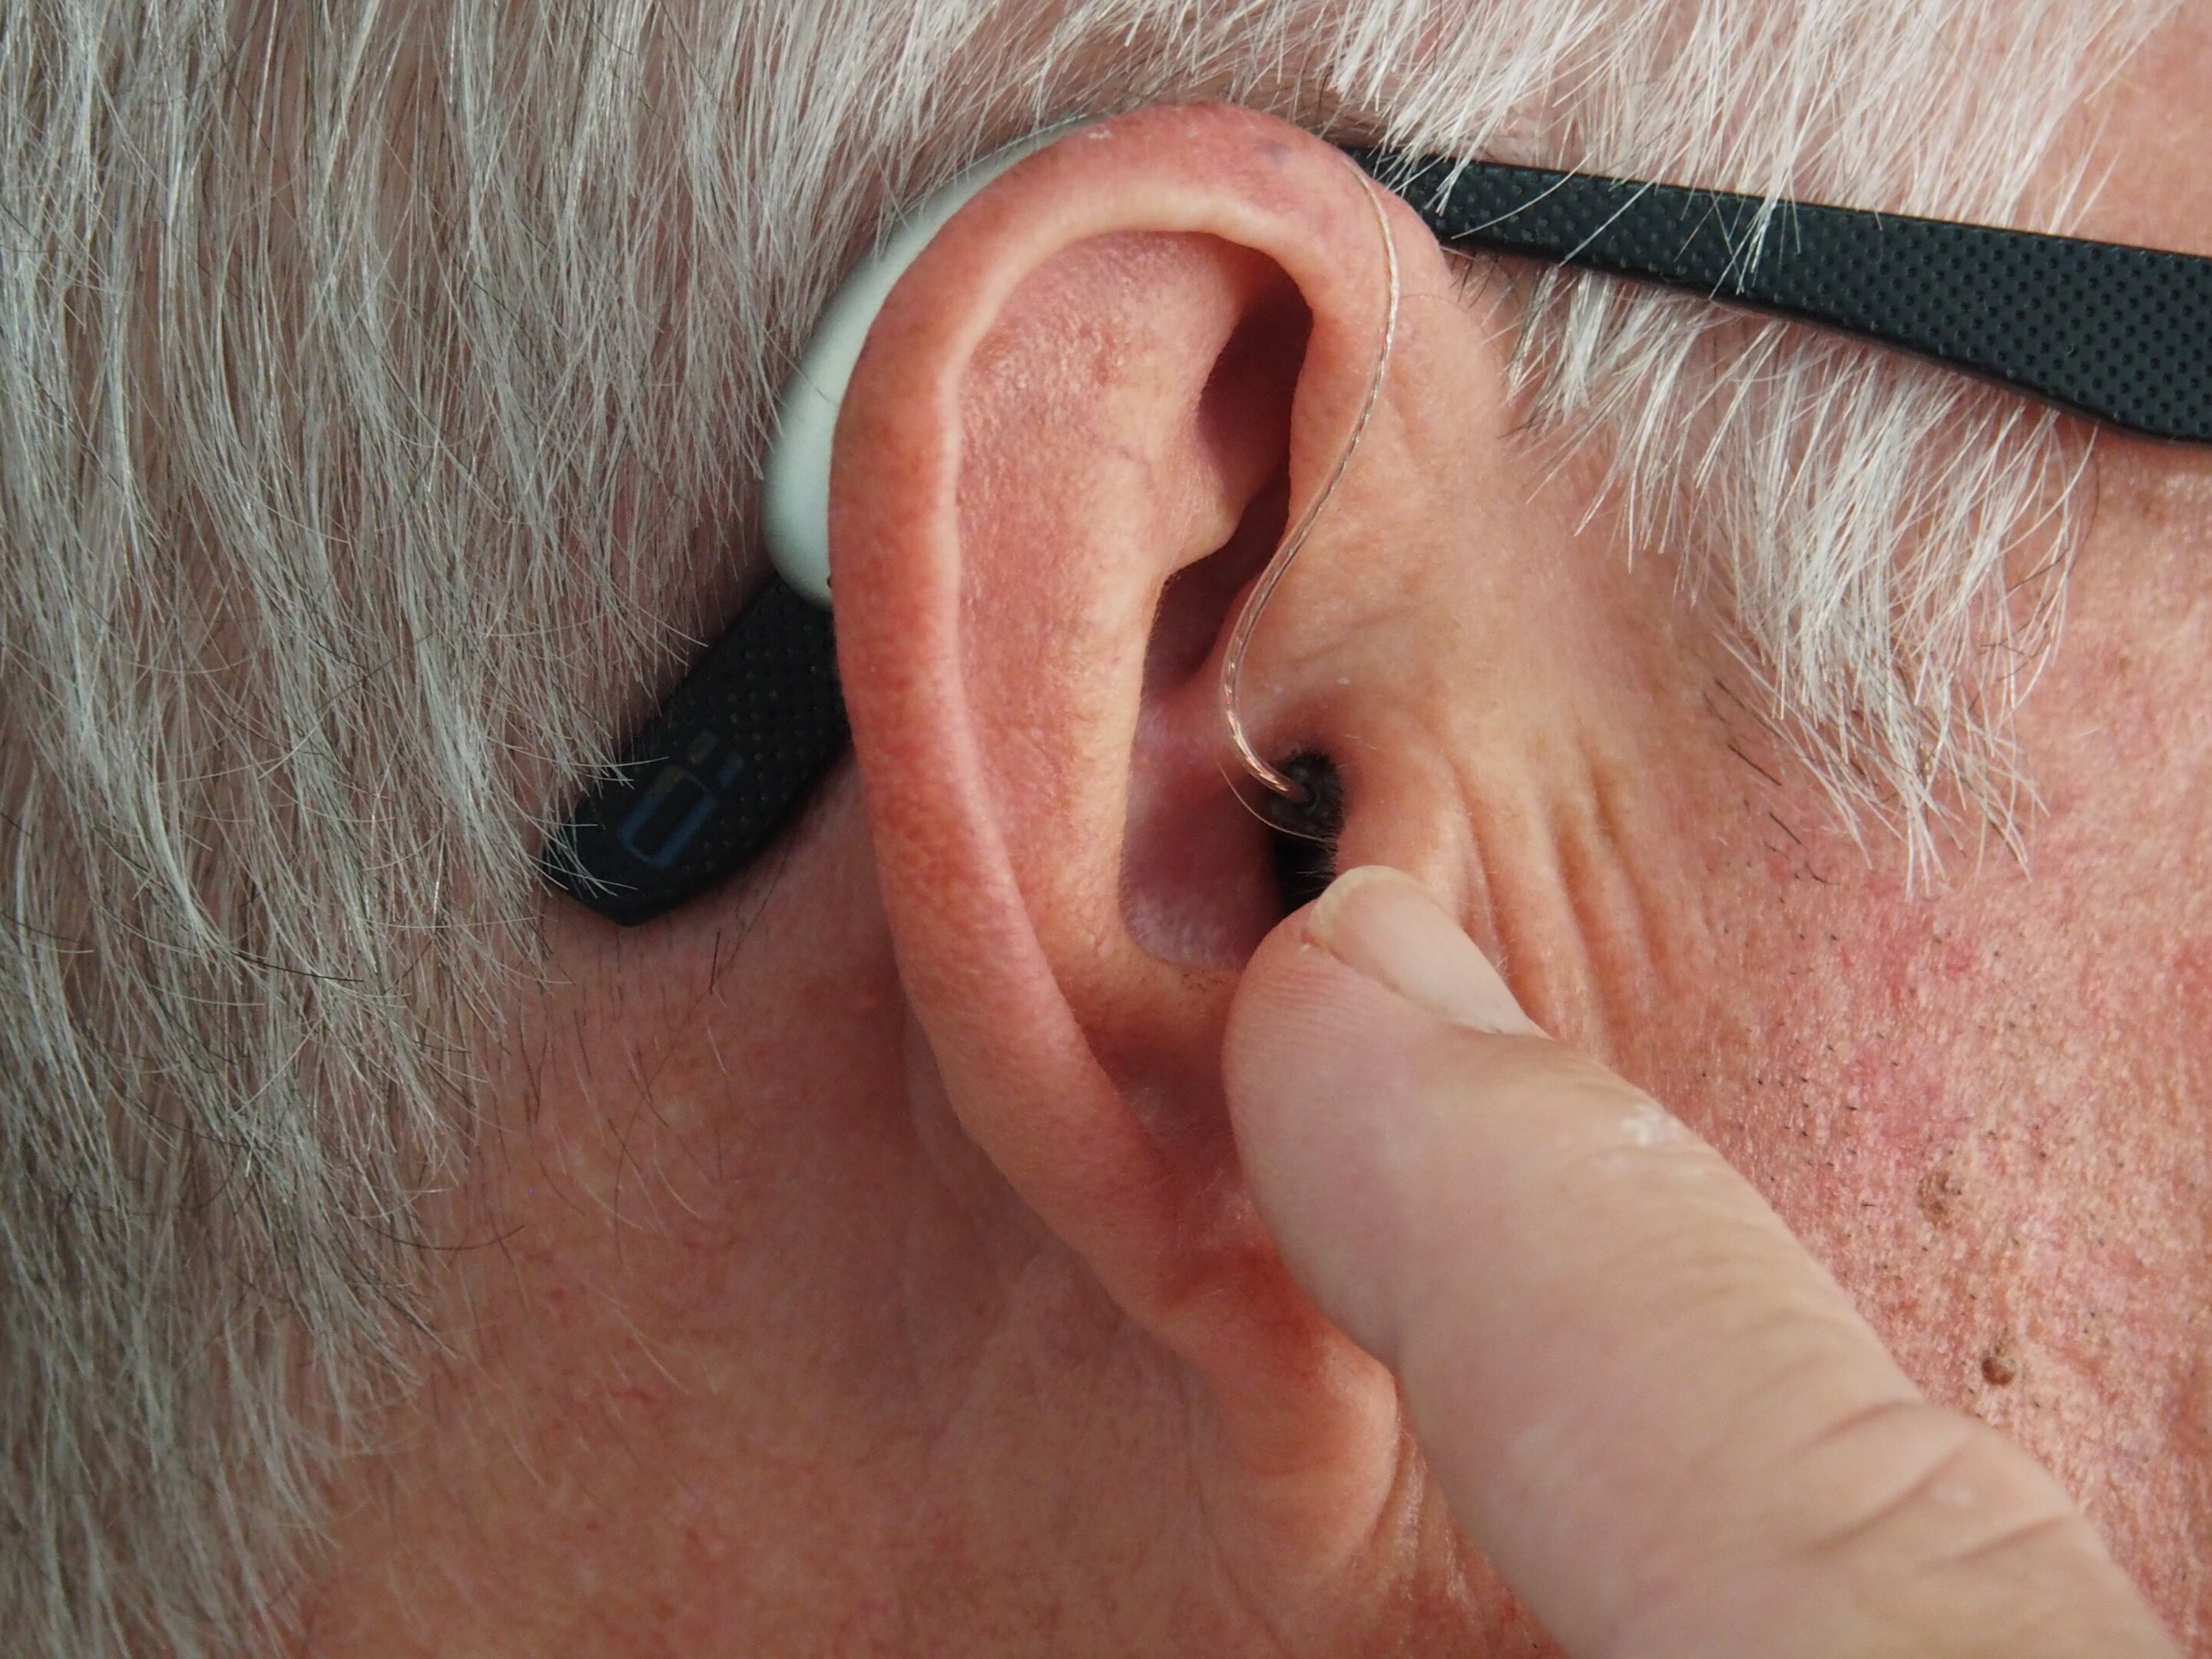 #Hearing aids may help those with hearing loss live longer, finds analysis